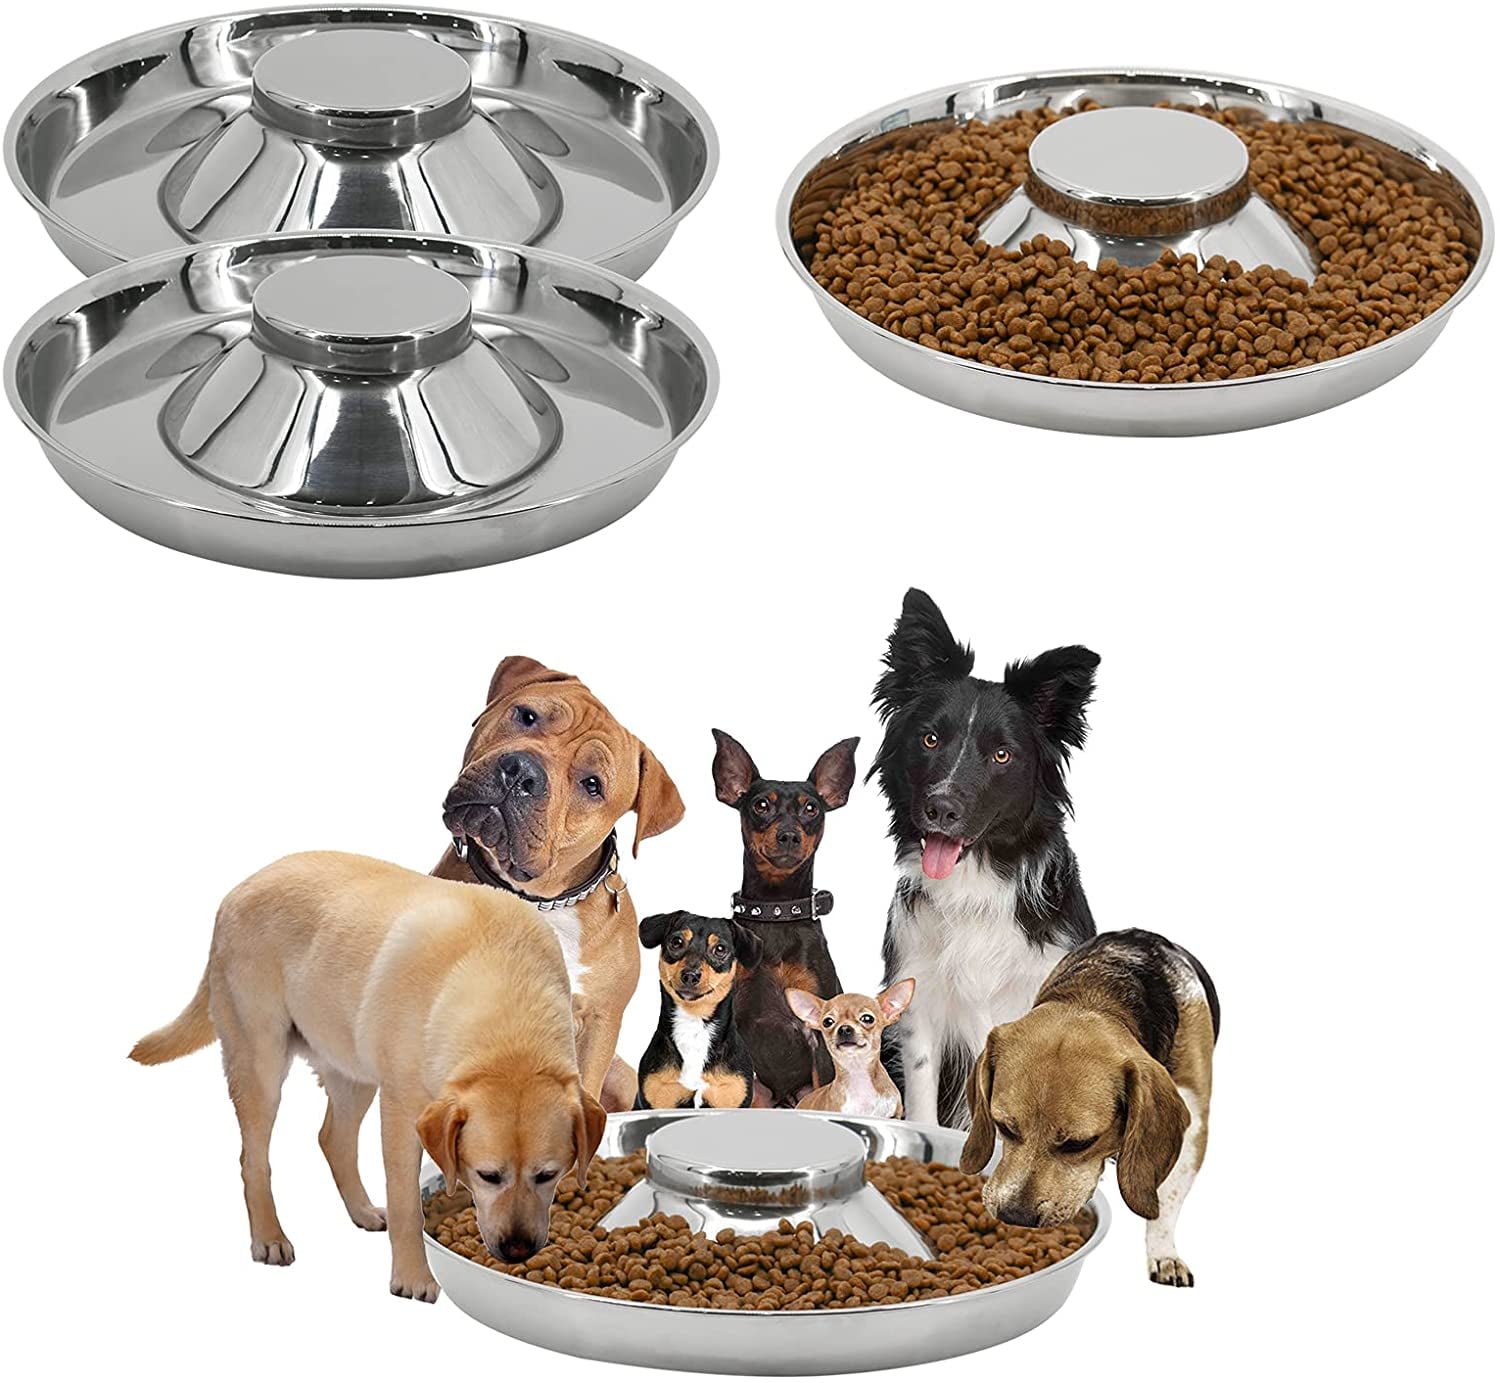 Pet feeding. Pets Ceramic Double Bowl Dog Cat food Water Feeder Stand raised Ceramic dish Bowl Wooden Dining Table Pet Supplies. Dish dogs